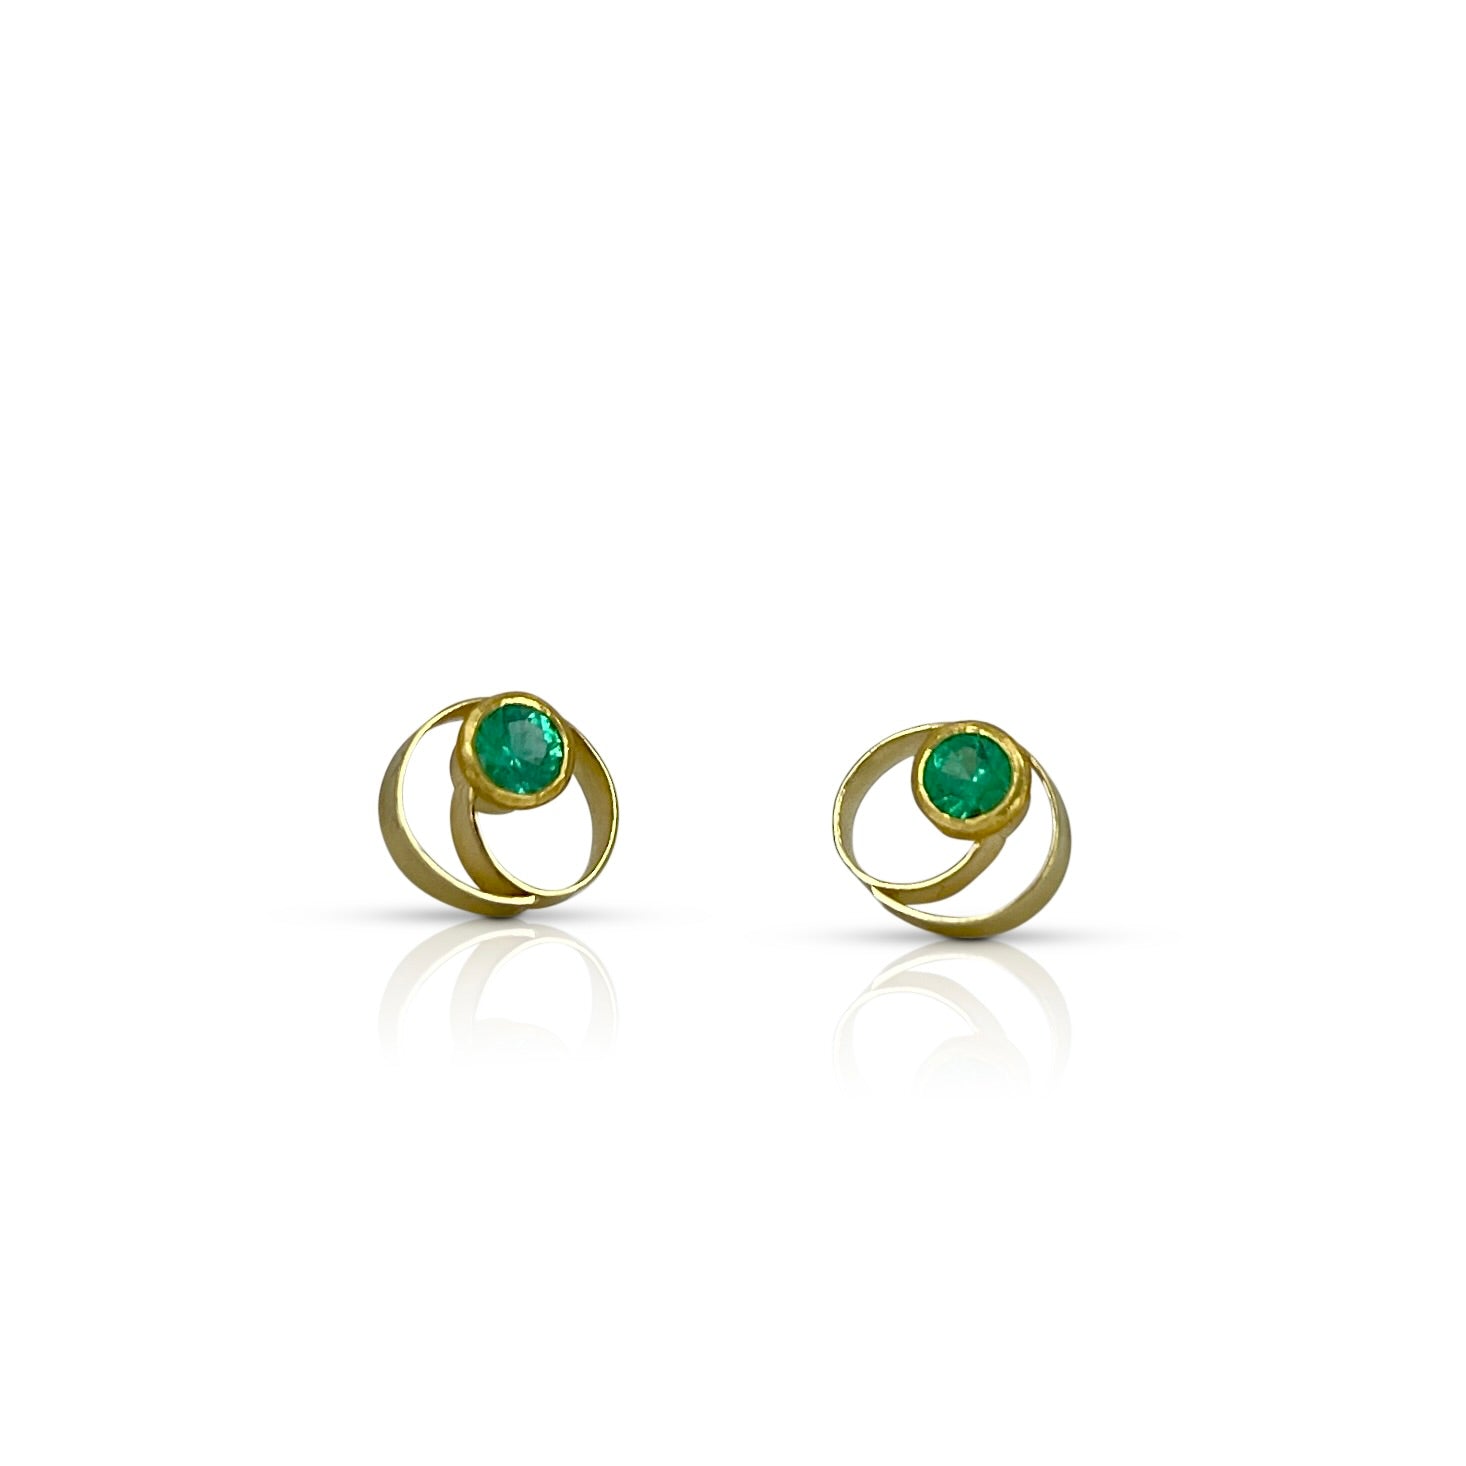 Coil style stud earrings in 18K and 22K yellow gold with emeralds by Ayesha Mayadas